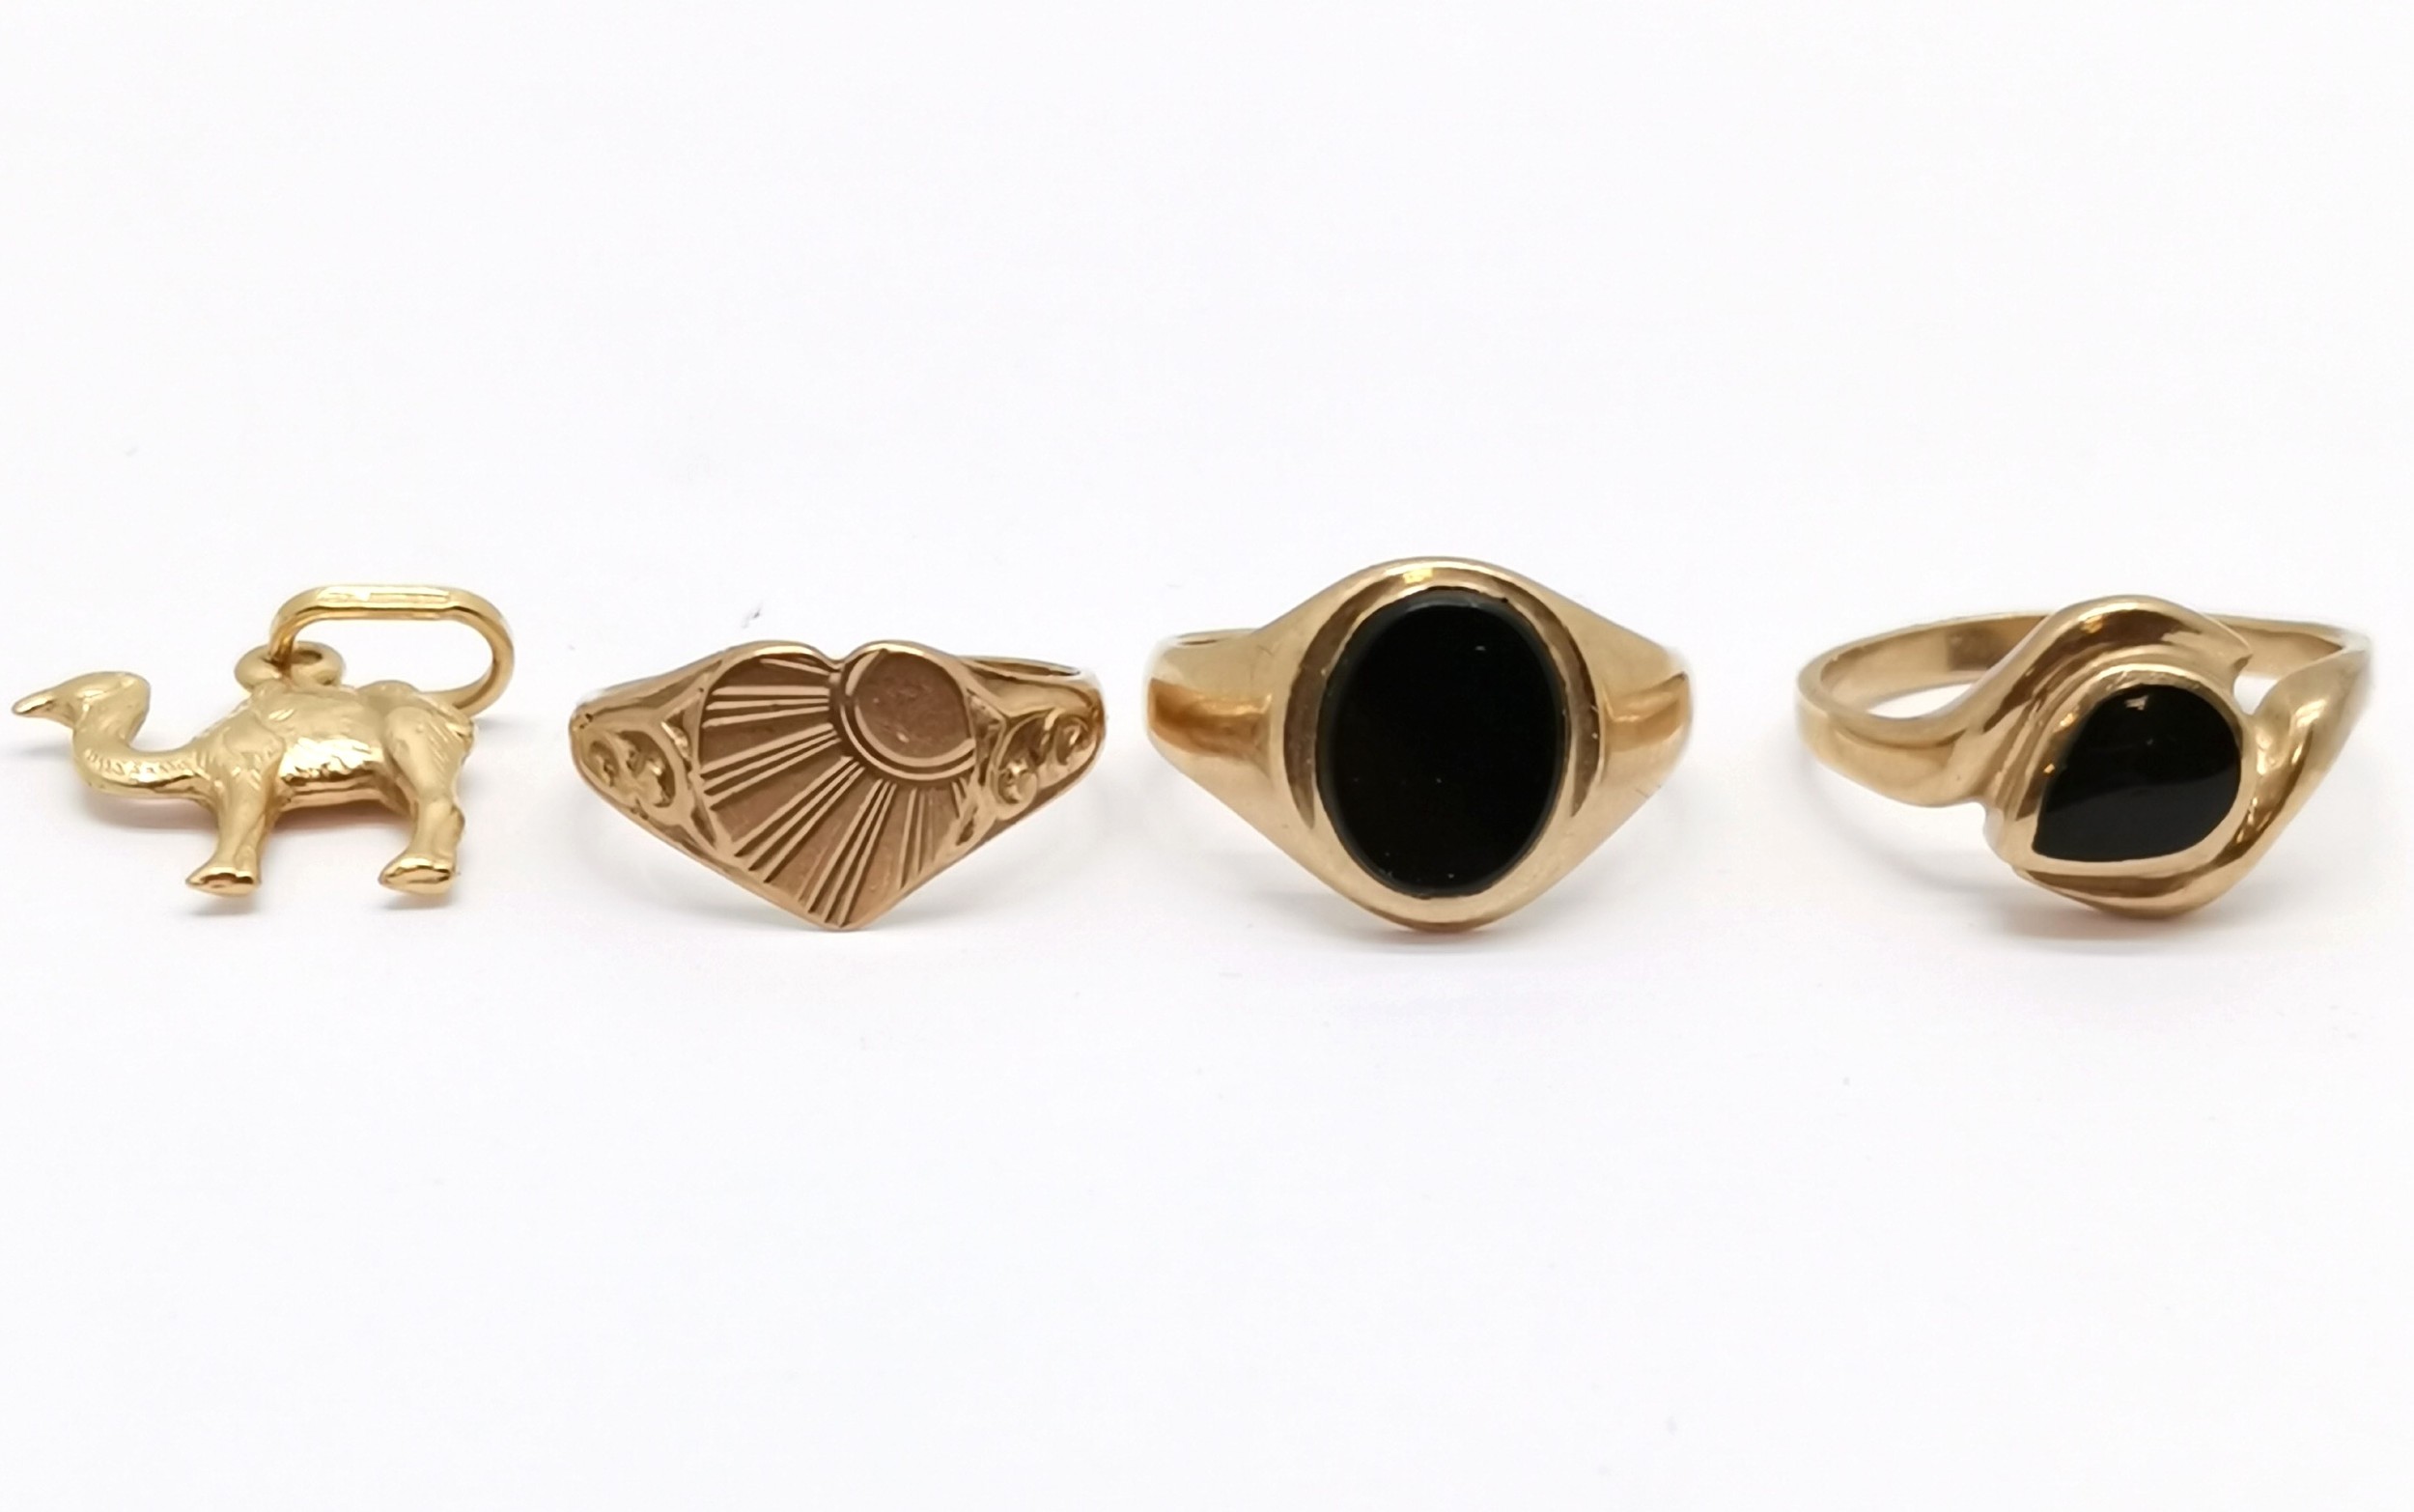 3 x 9ct gold rings inc 2 set with onyx (inc signet) t/w 9ct gold camel charm - 9.7g total weight